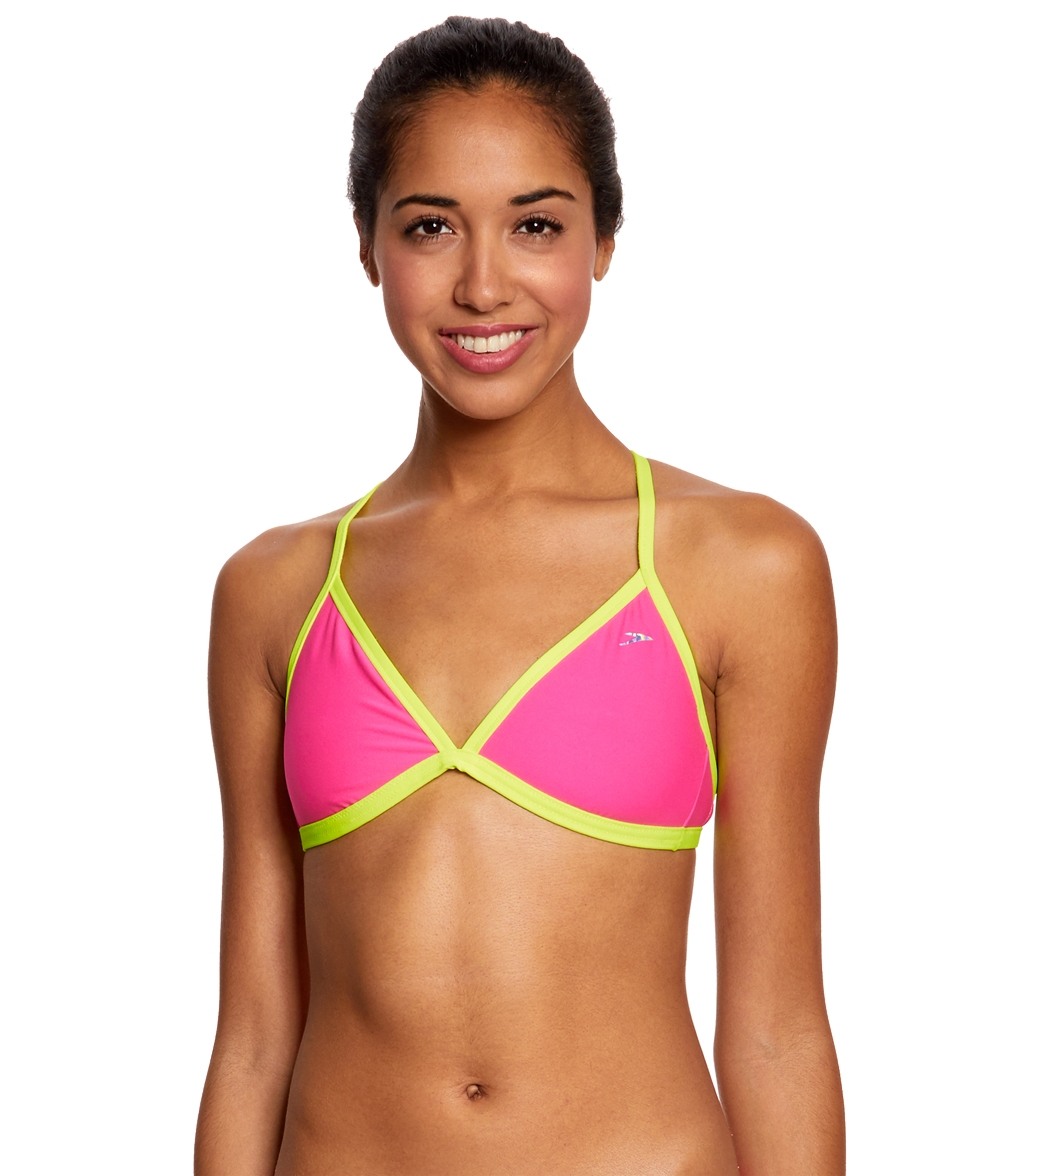 Speedo Missy Franklin Endurance Lite Triangle Swimsuit Top - Electric Pink Large Polyester/Pbt - Swimoutlet.com